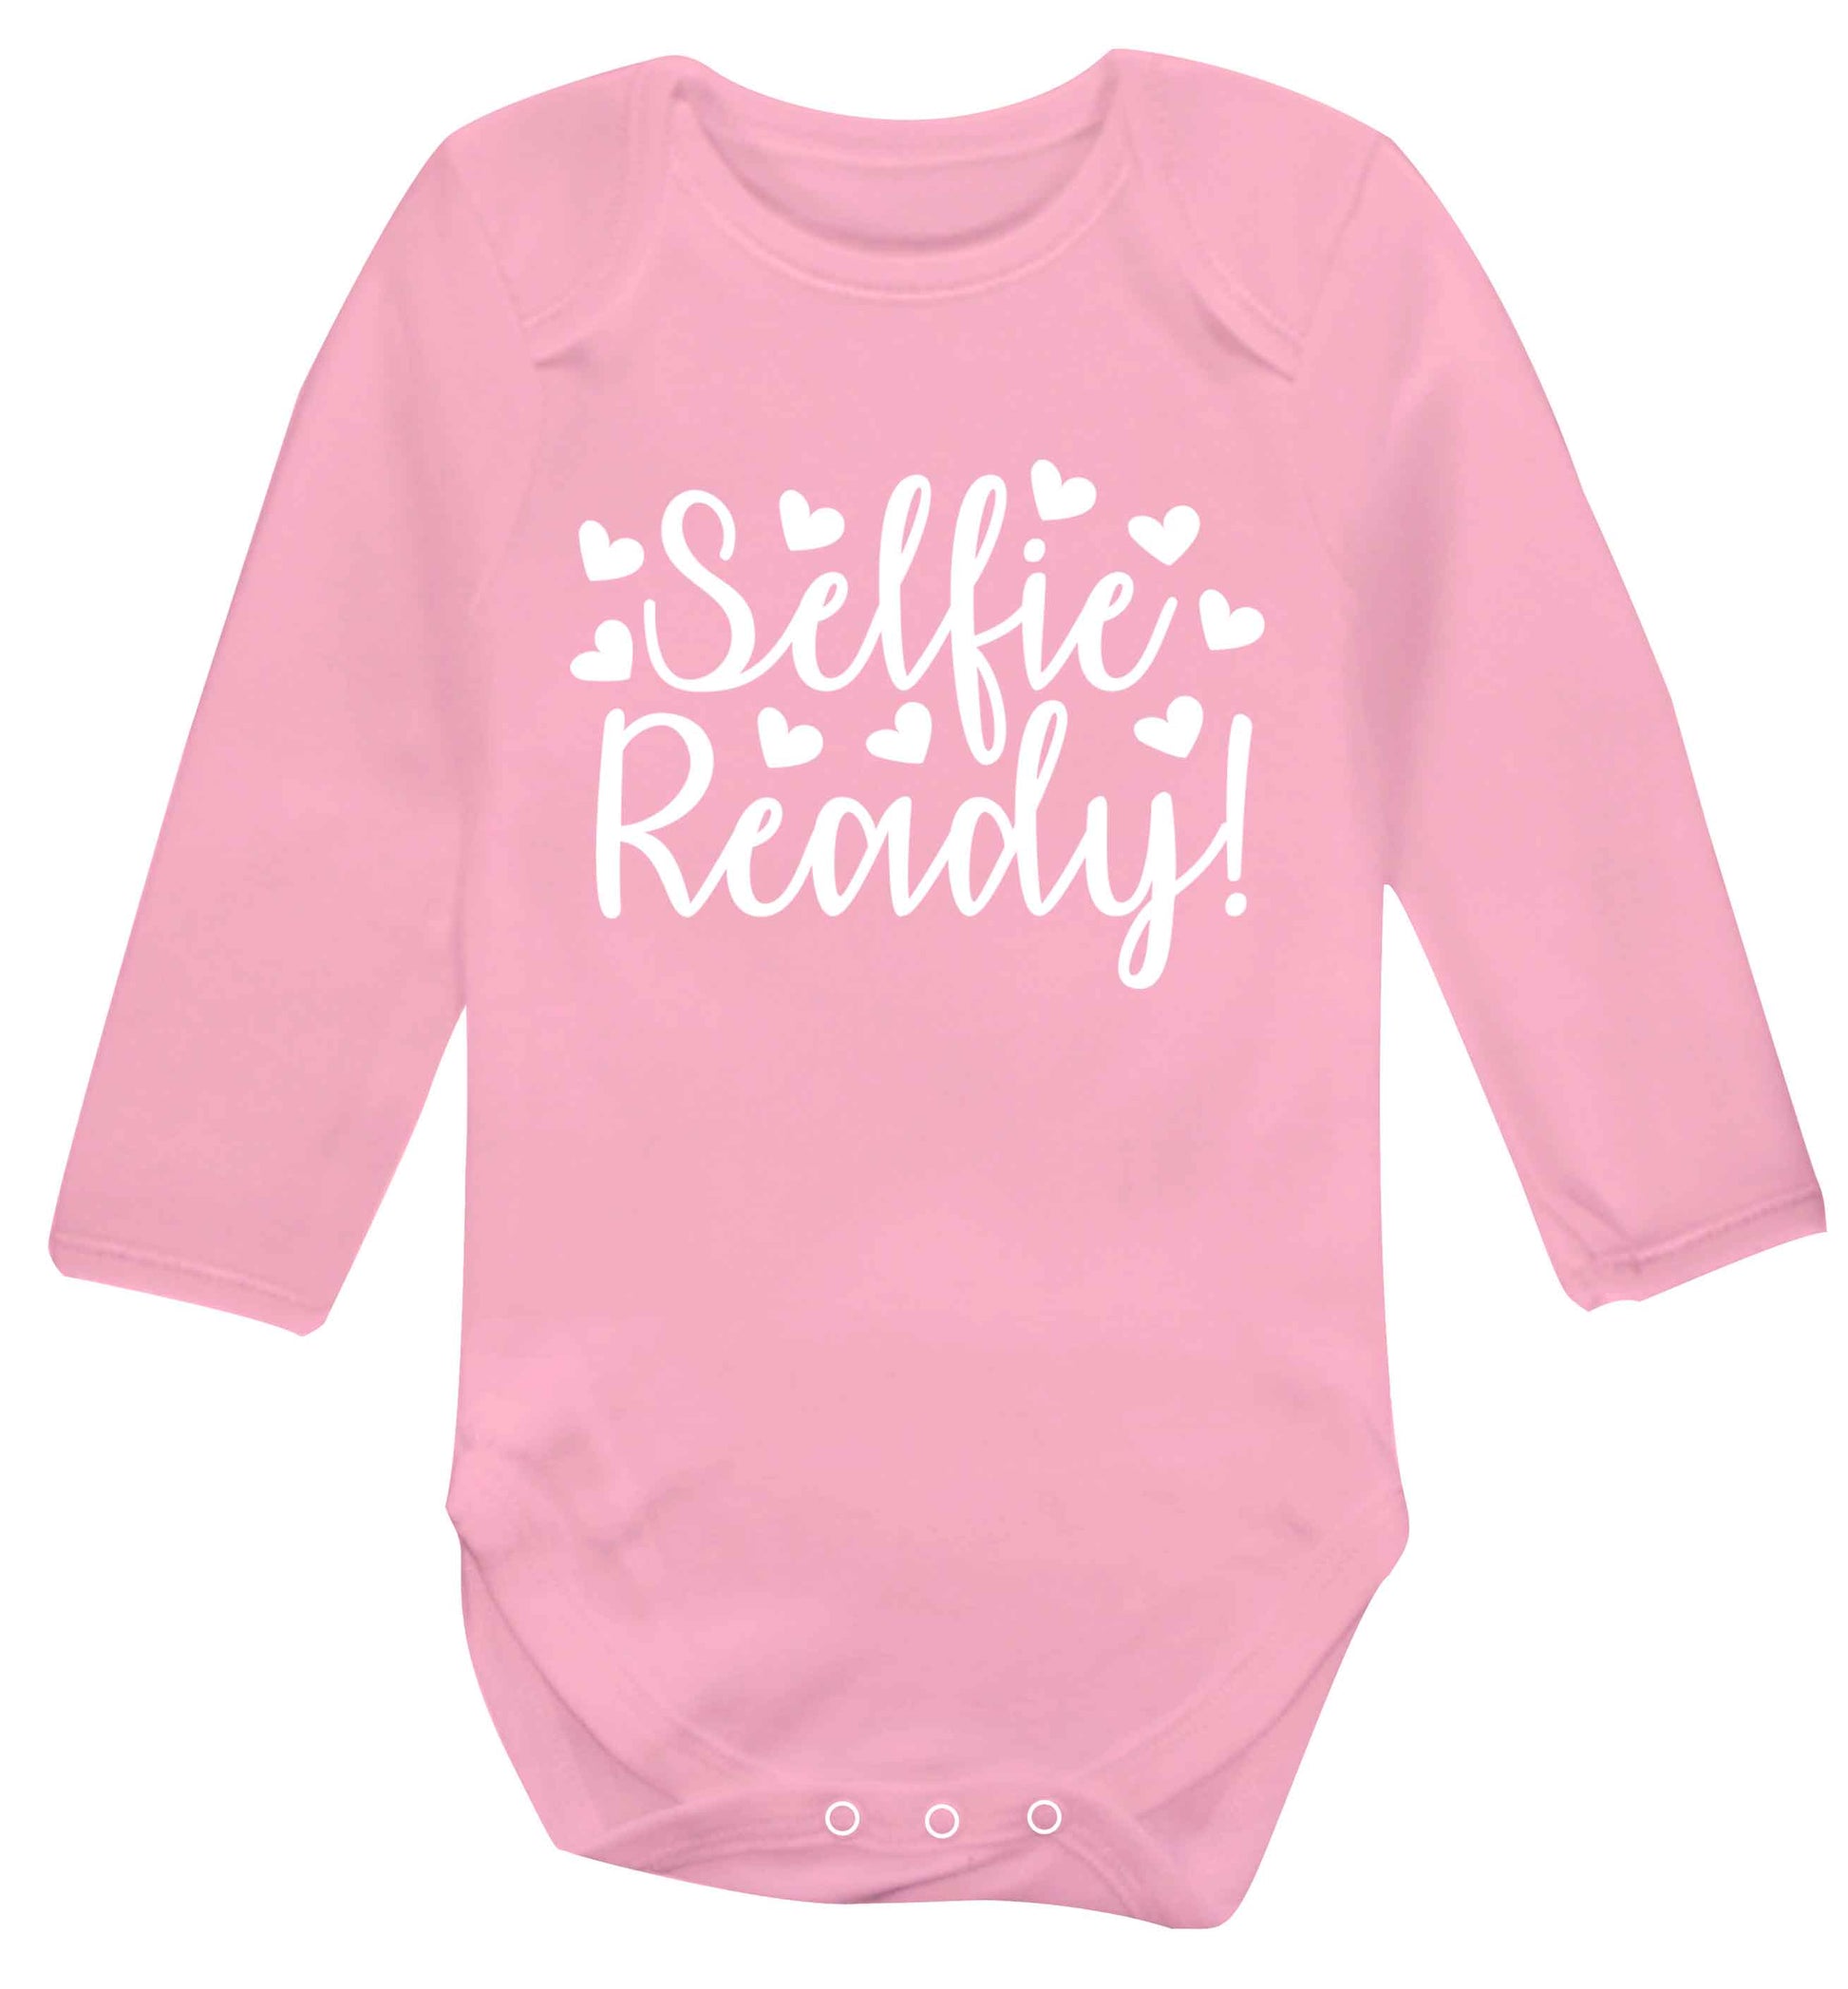 Selfie ready Baby Vest long sleeved pale pink 6-12 months